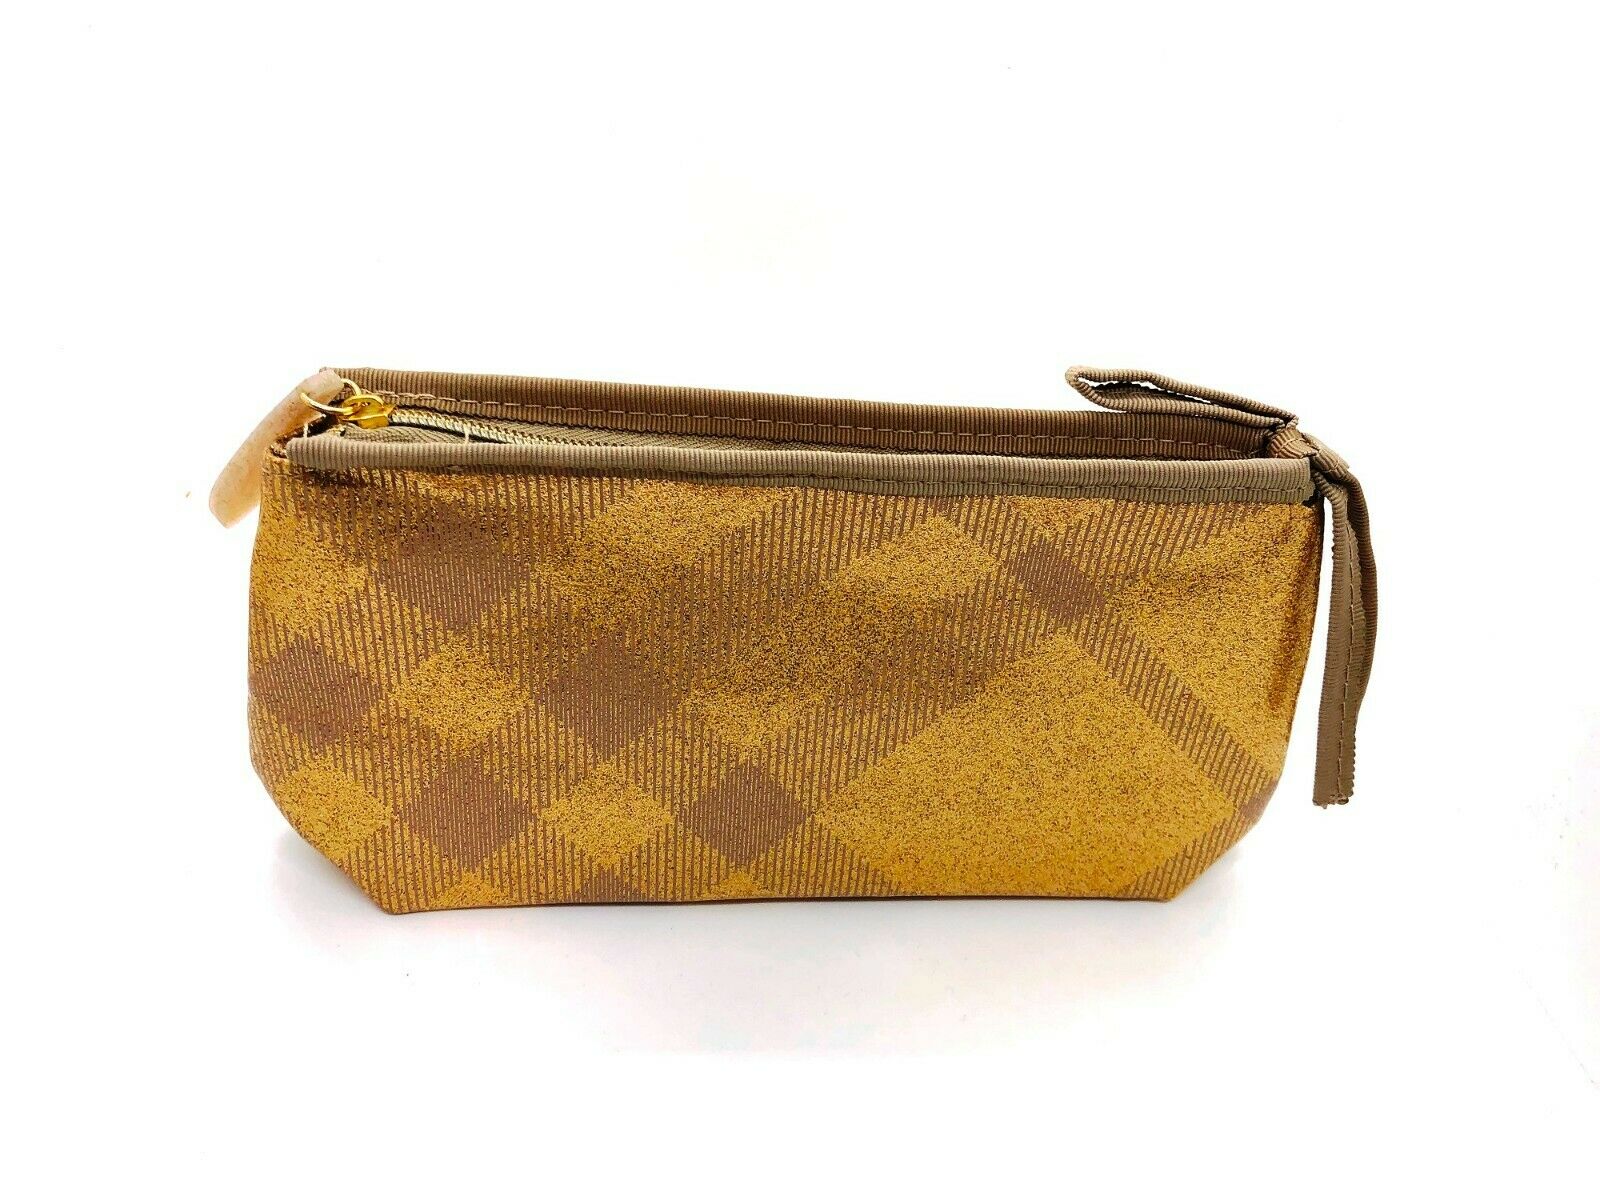 Burberry Large Metallic Gold Travel Toiletry Makeup Bag Pouch